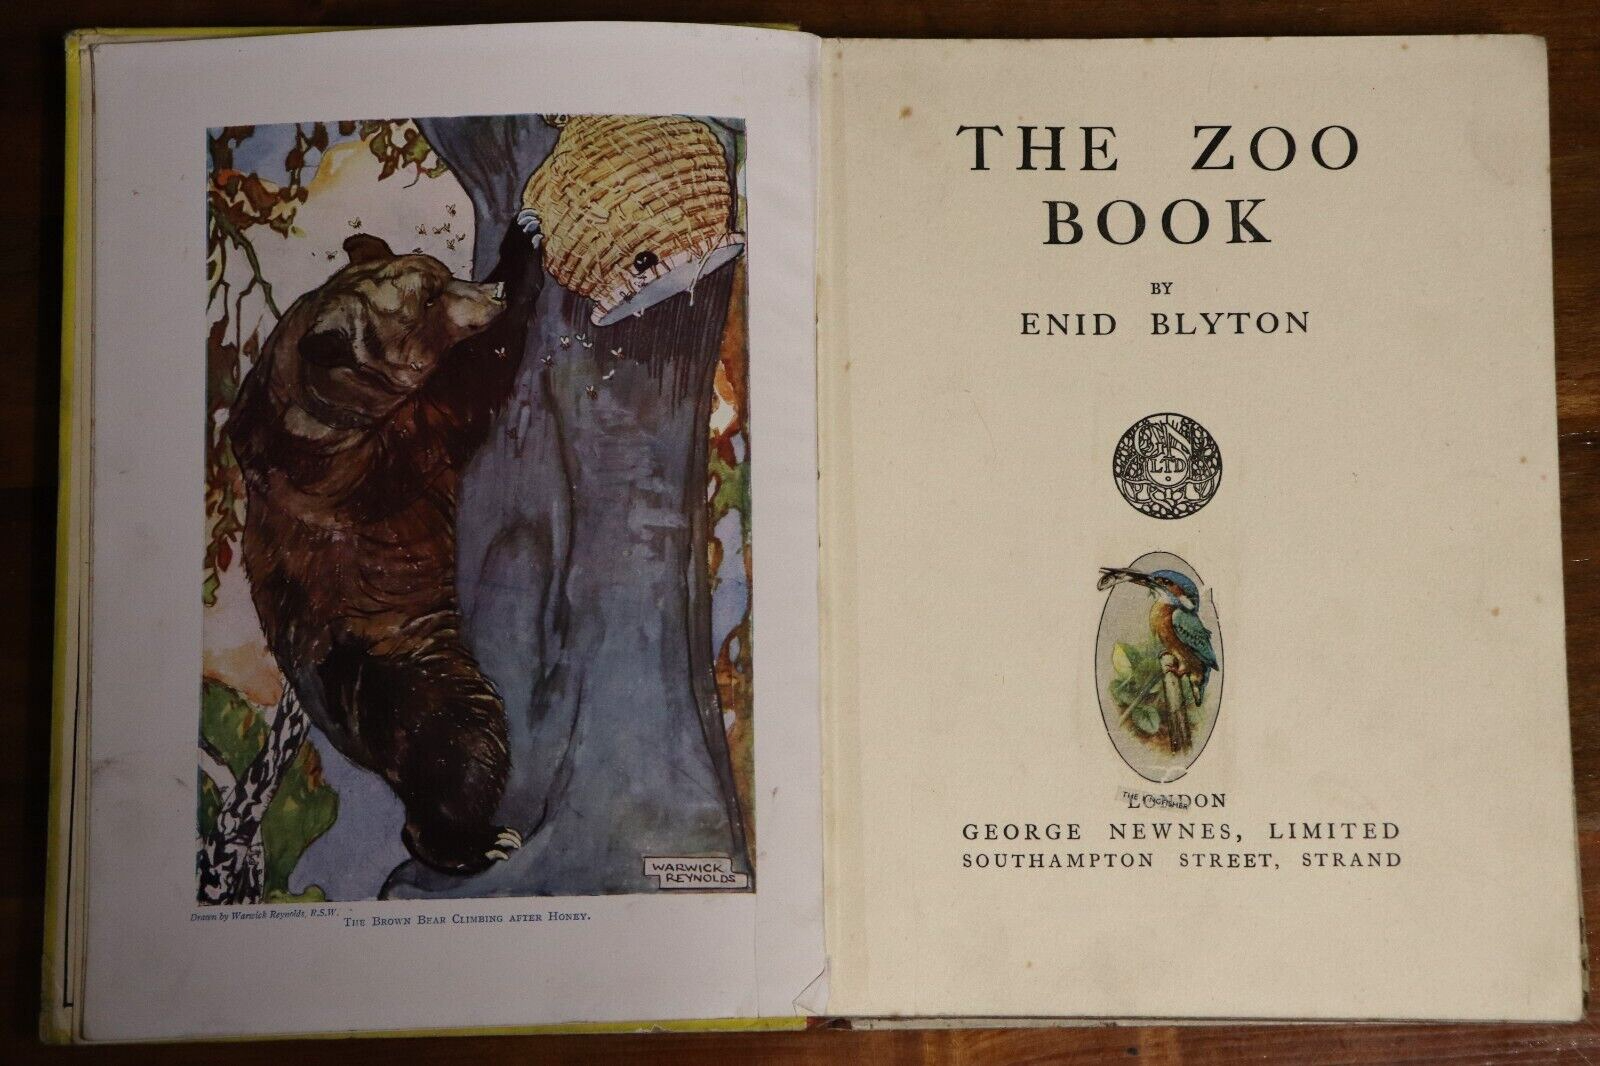 The Zoo Book by Enid Blyton - c1926 - Antique Childrens Book - 0